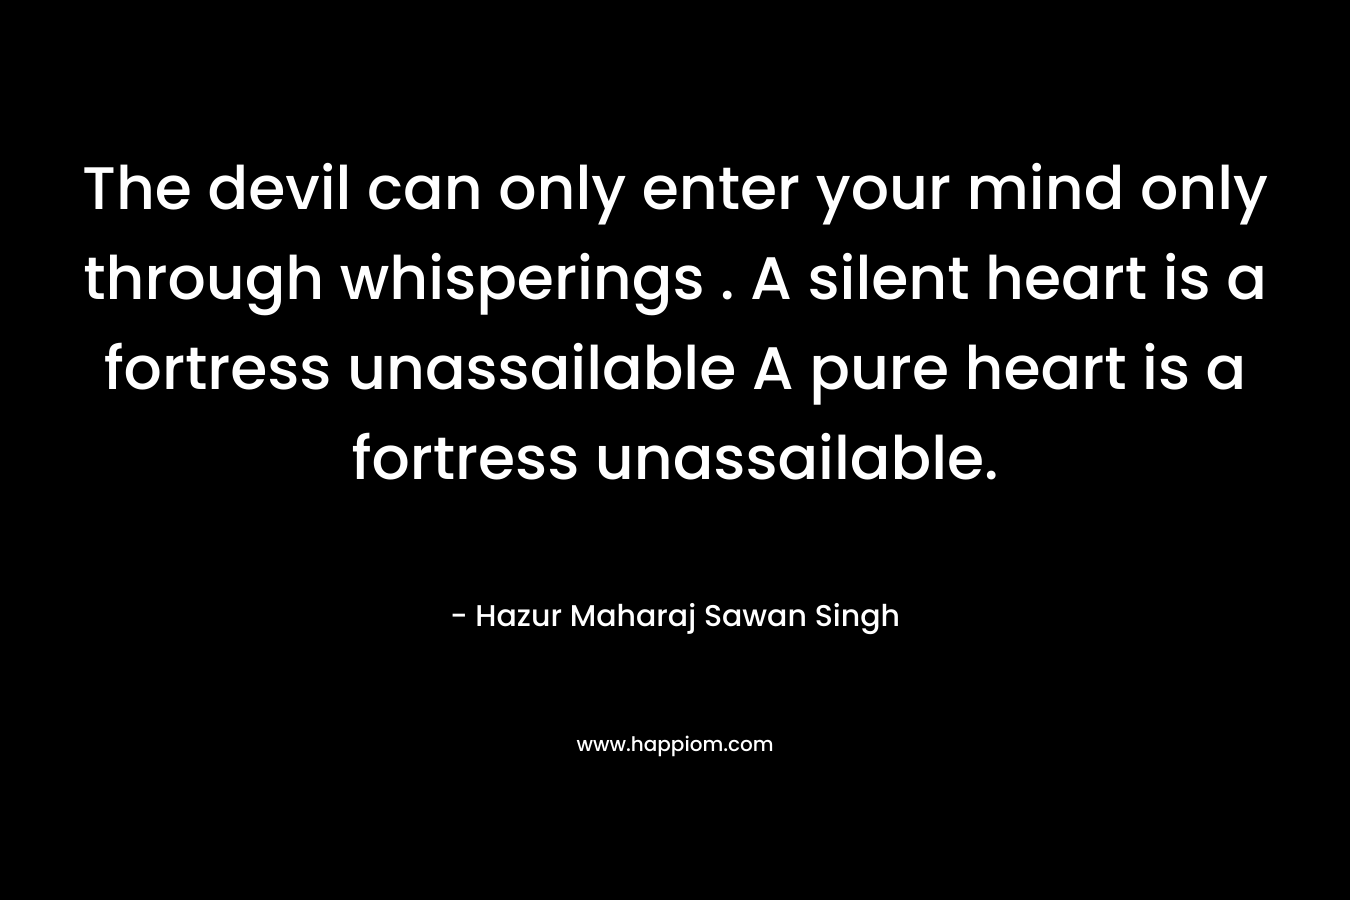 The devil can only enter your mind only through whisperings . A silent heart is a fortress unassailable A pure heart is a fortress unassailable. – Hazur Maharaj Sawan Singh